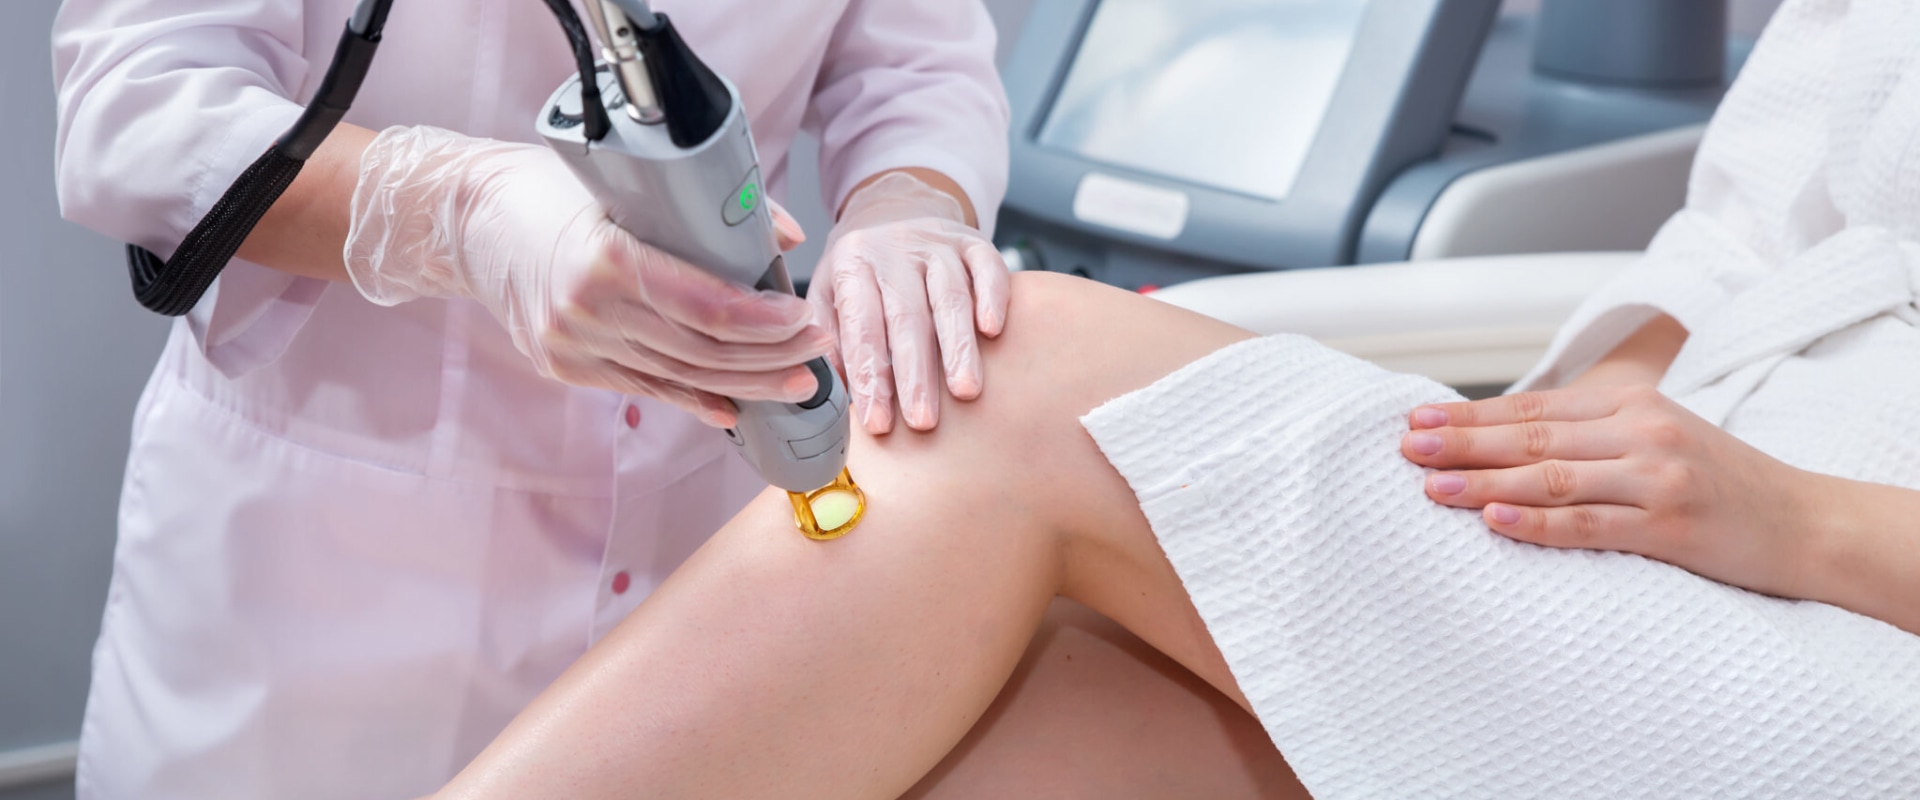 The Financial Risks of Laser Hair Removal